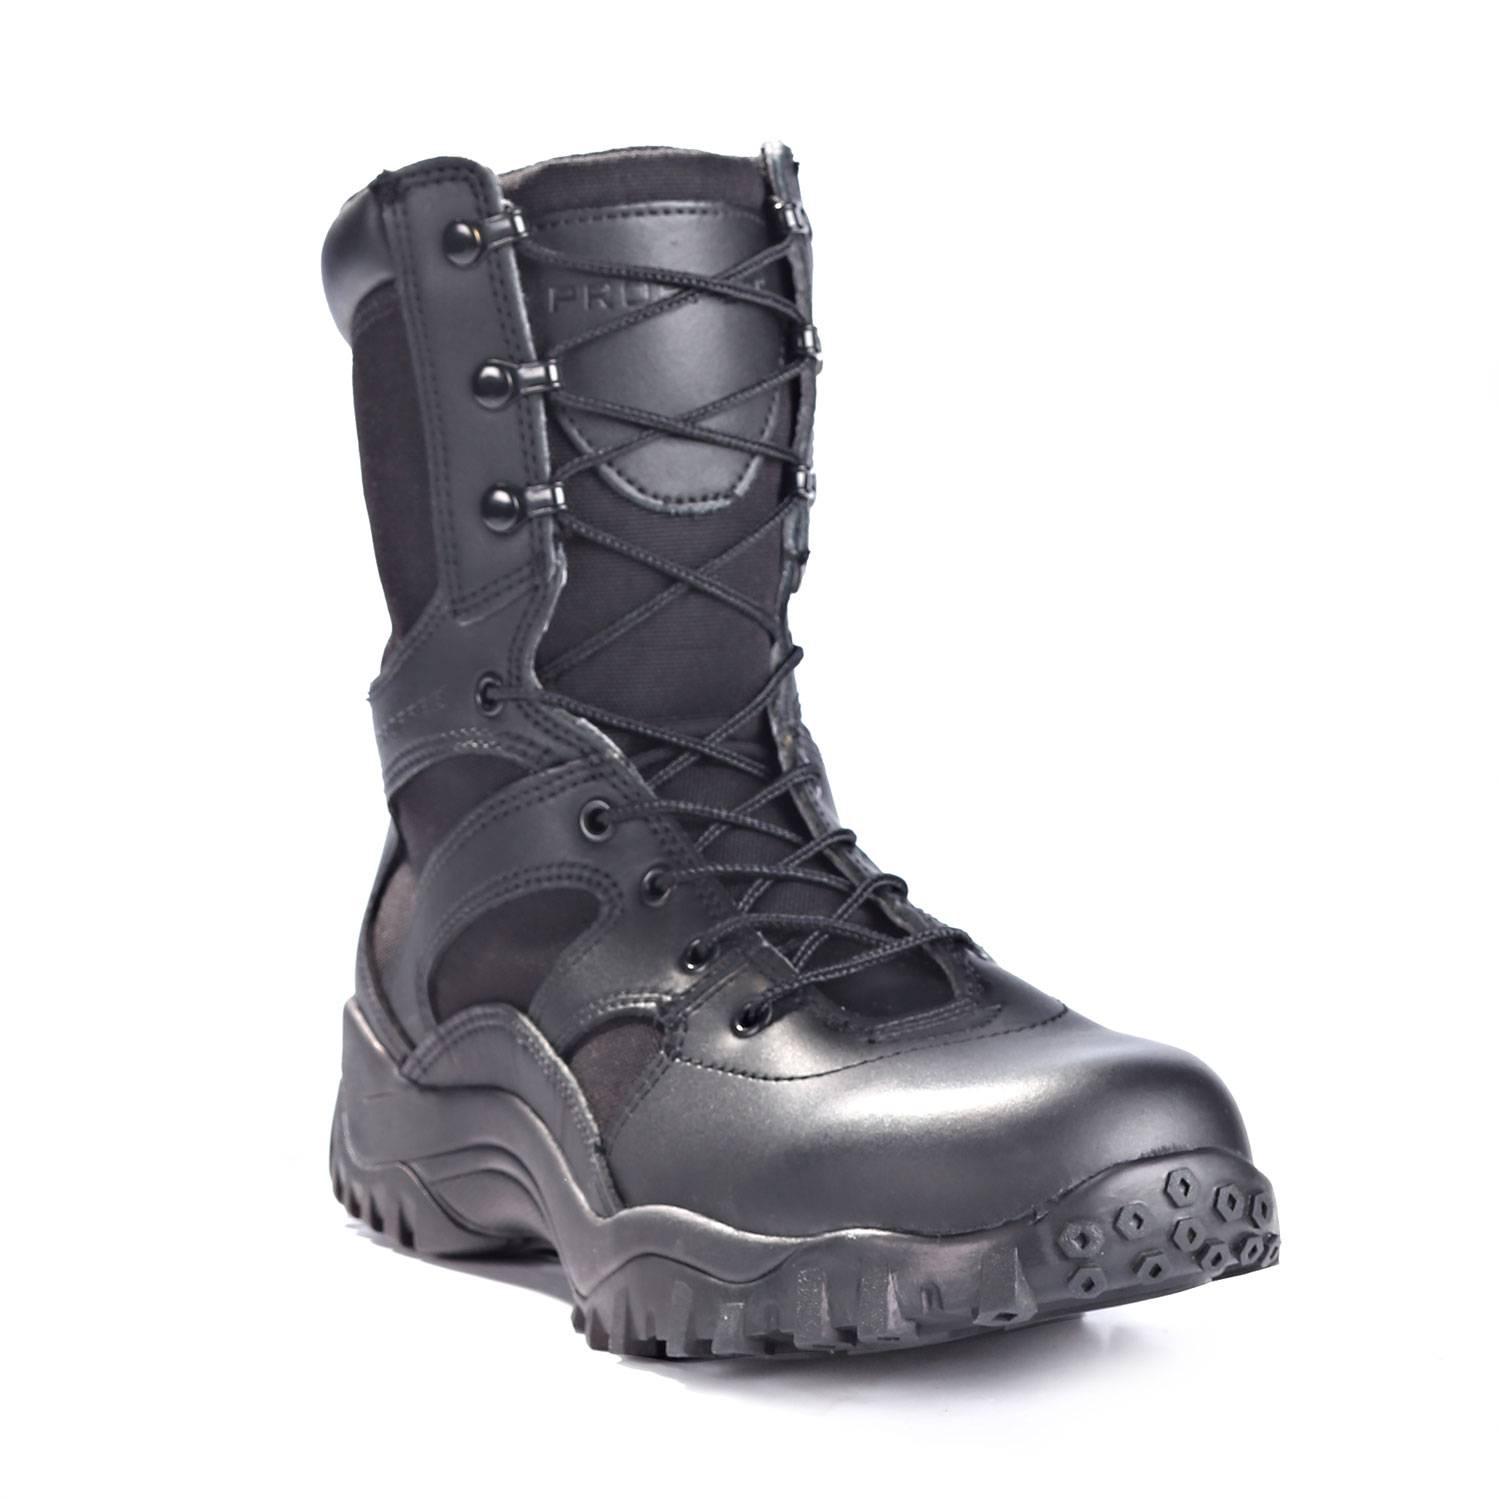 PROPPER 8" Tactical Duty Boot